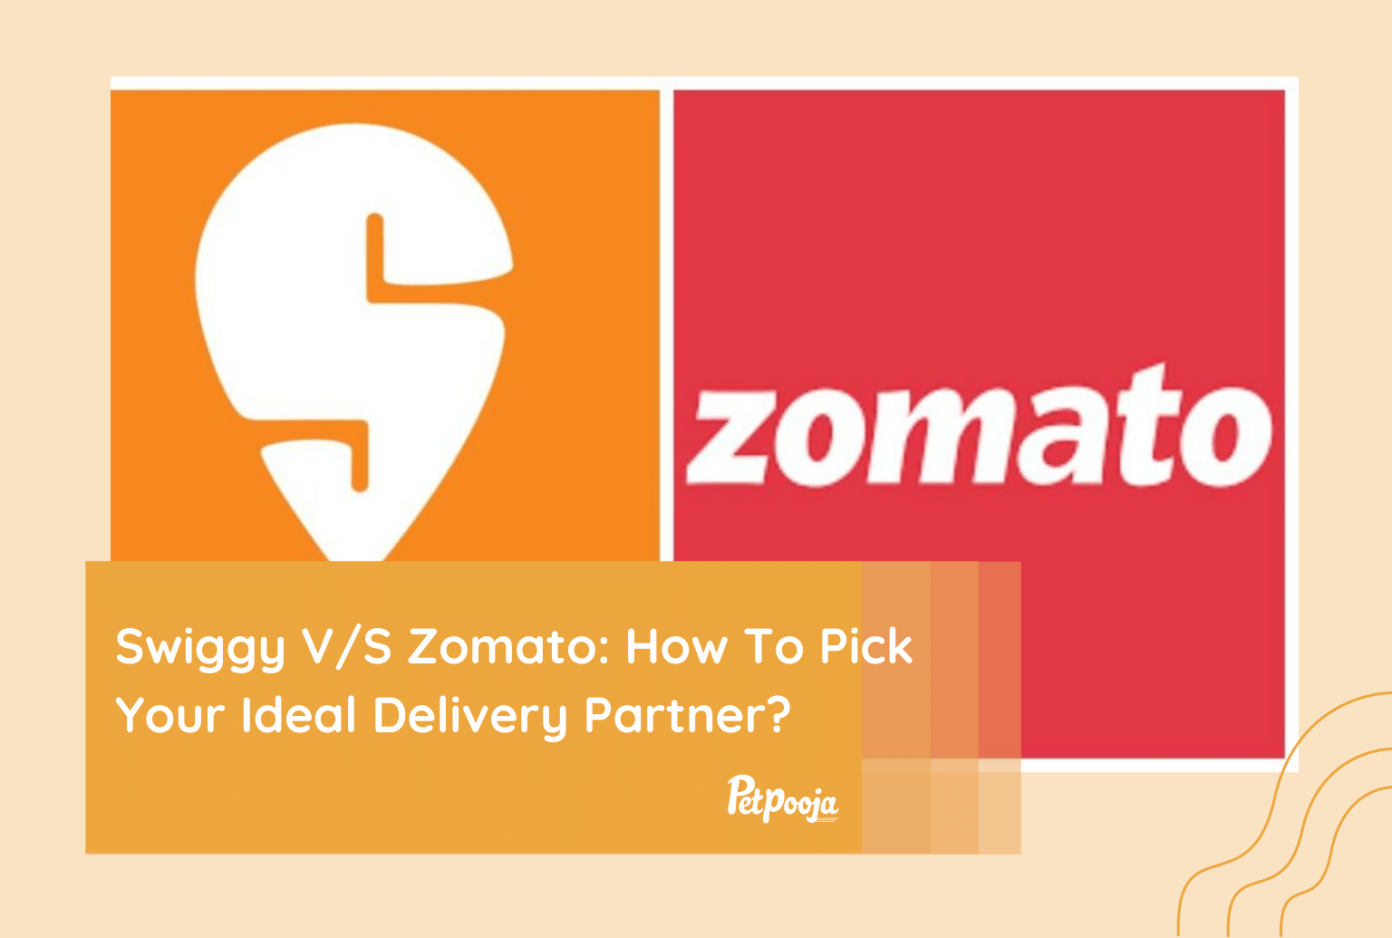 Swiggy V/S Zomato: How To Pick Your Ideal Delivery Partner?